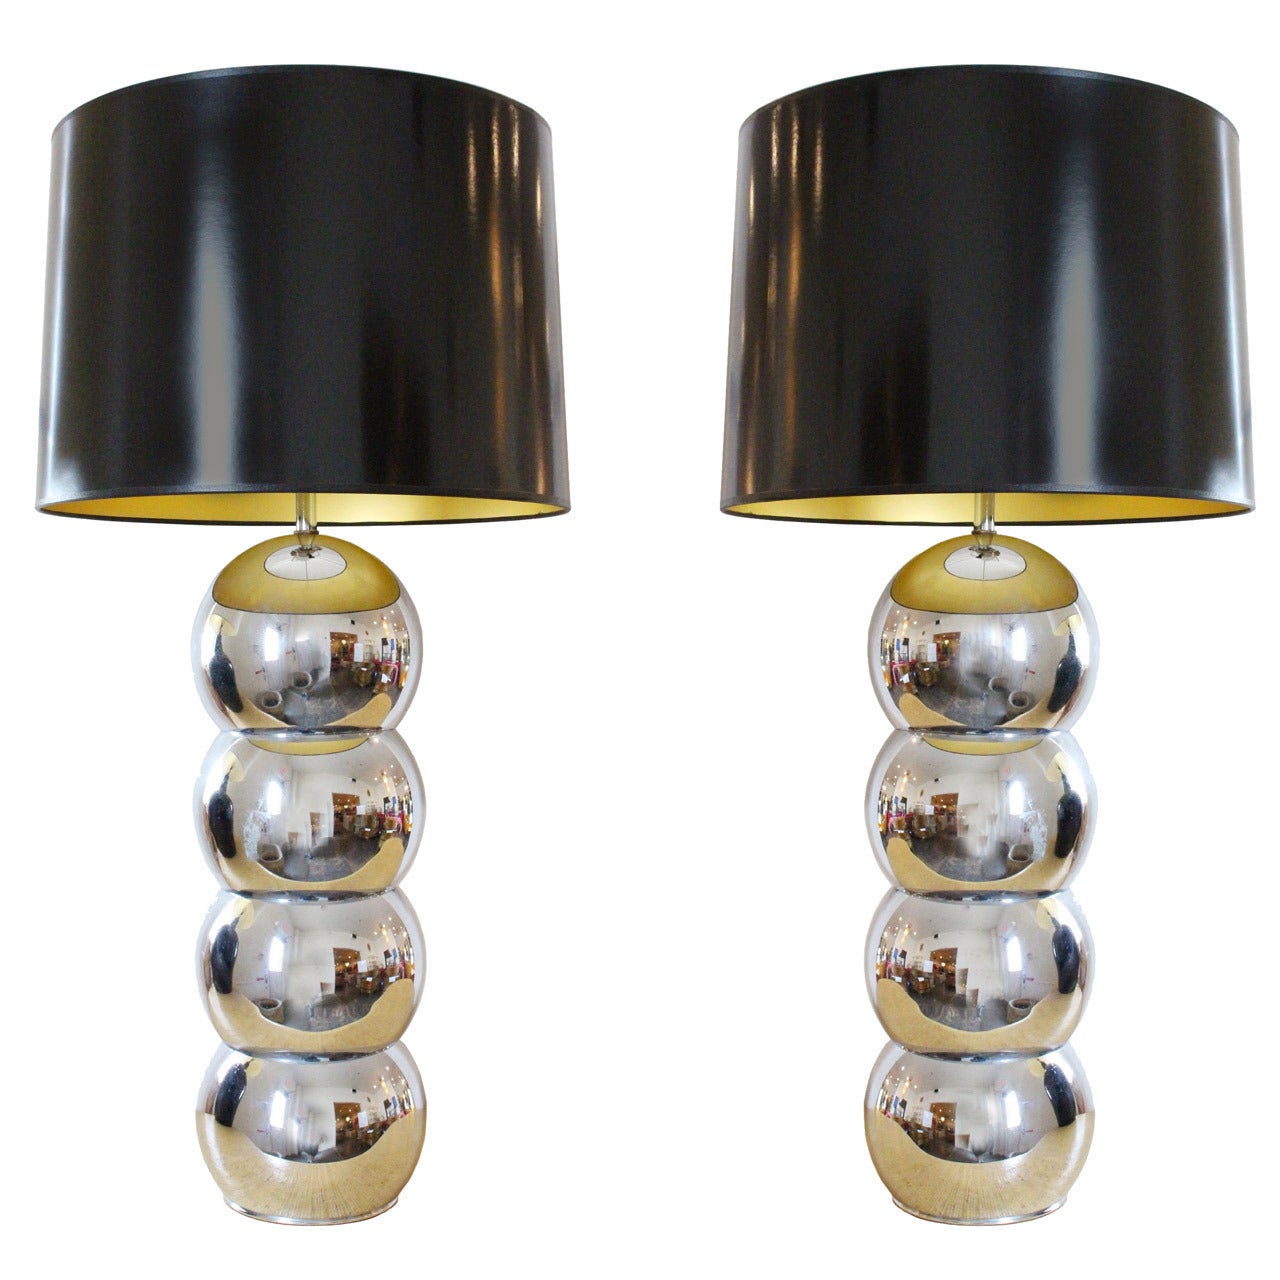 Pair of Chrome Ball Lamps by George Kovacs